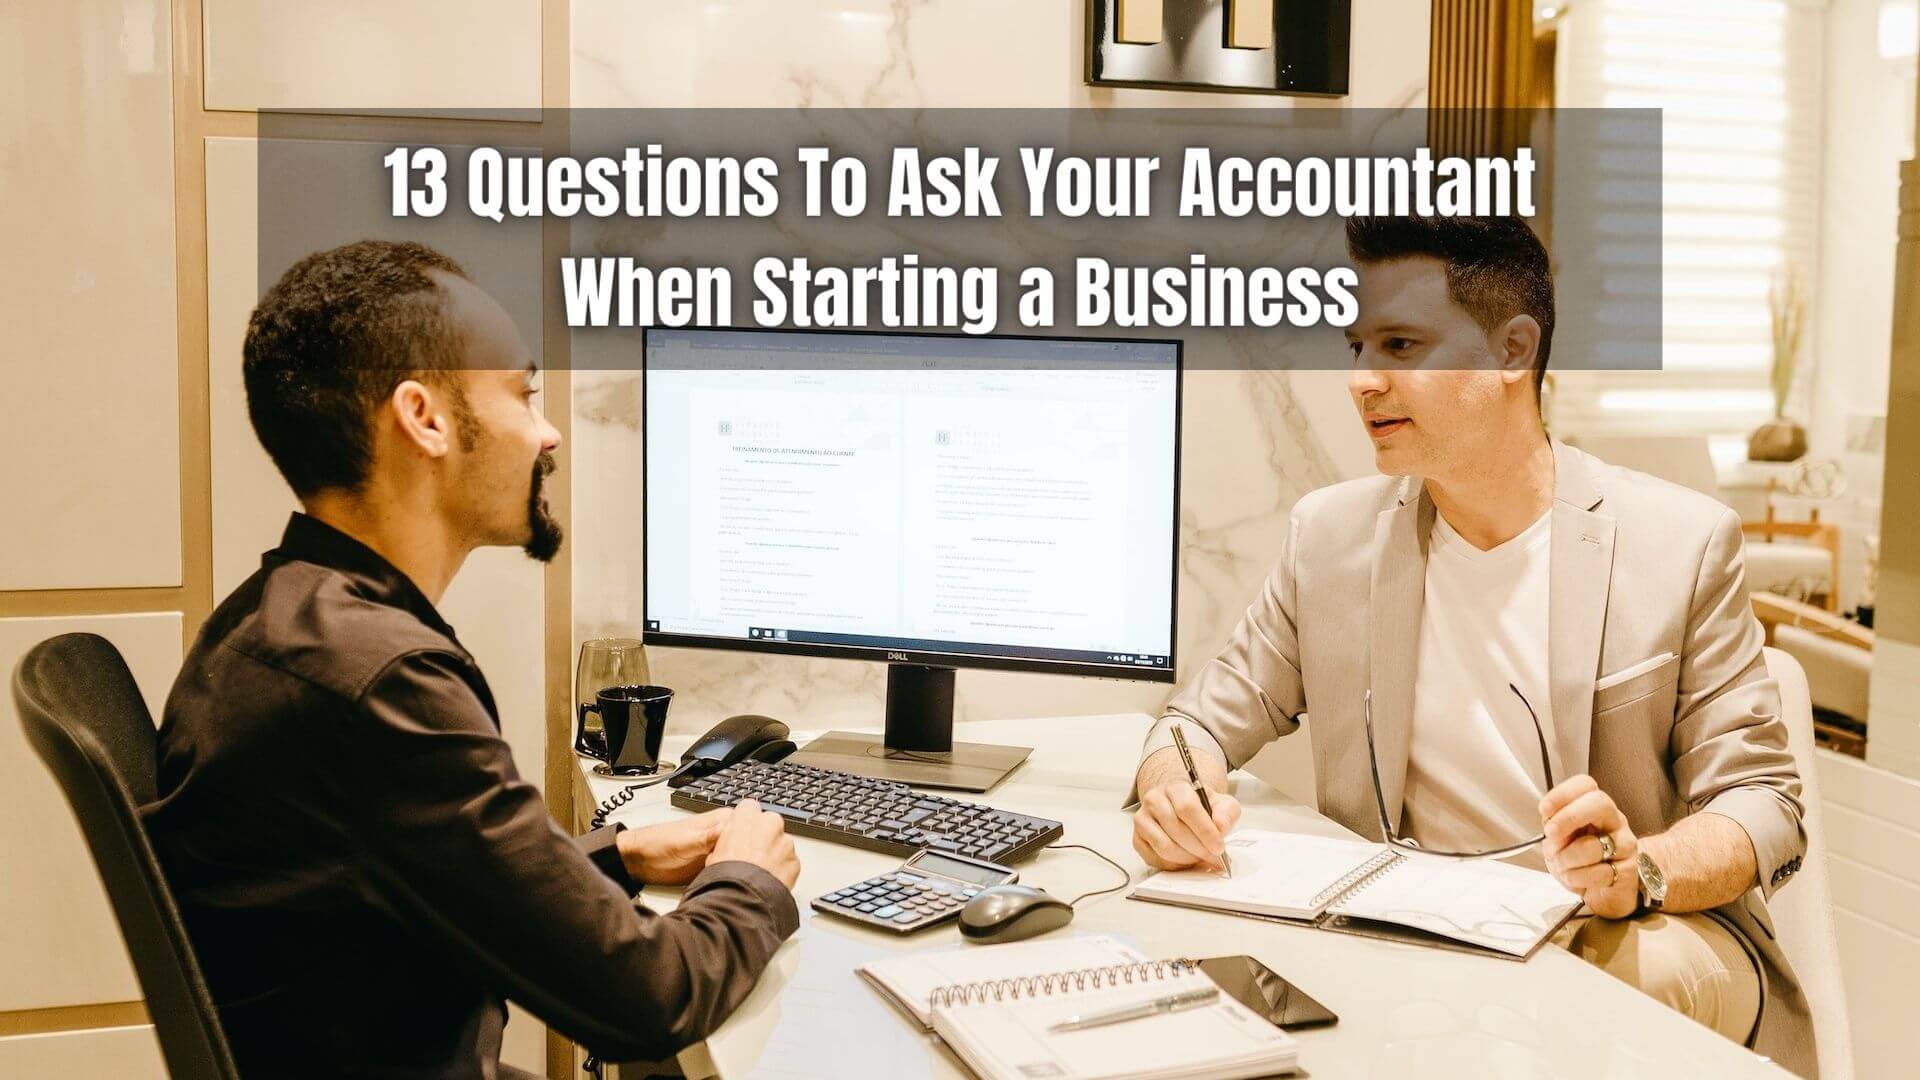 An accountant can provide invaluable insight for you when starting a business. Here are the 13 questions you should ask your accountant first.